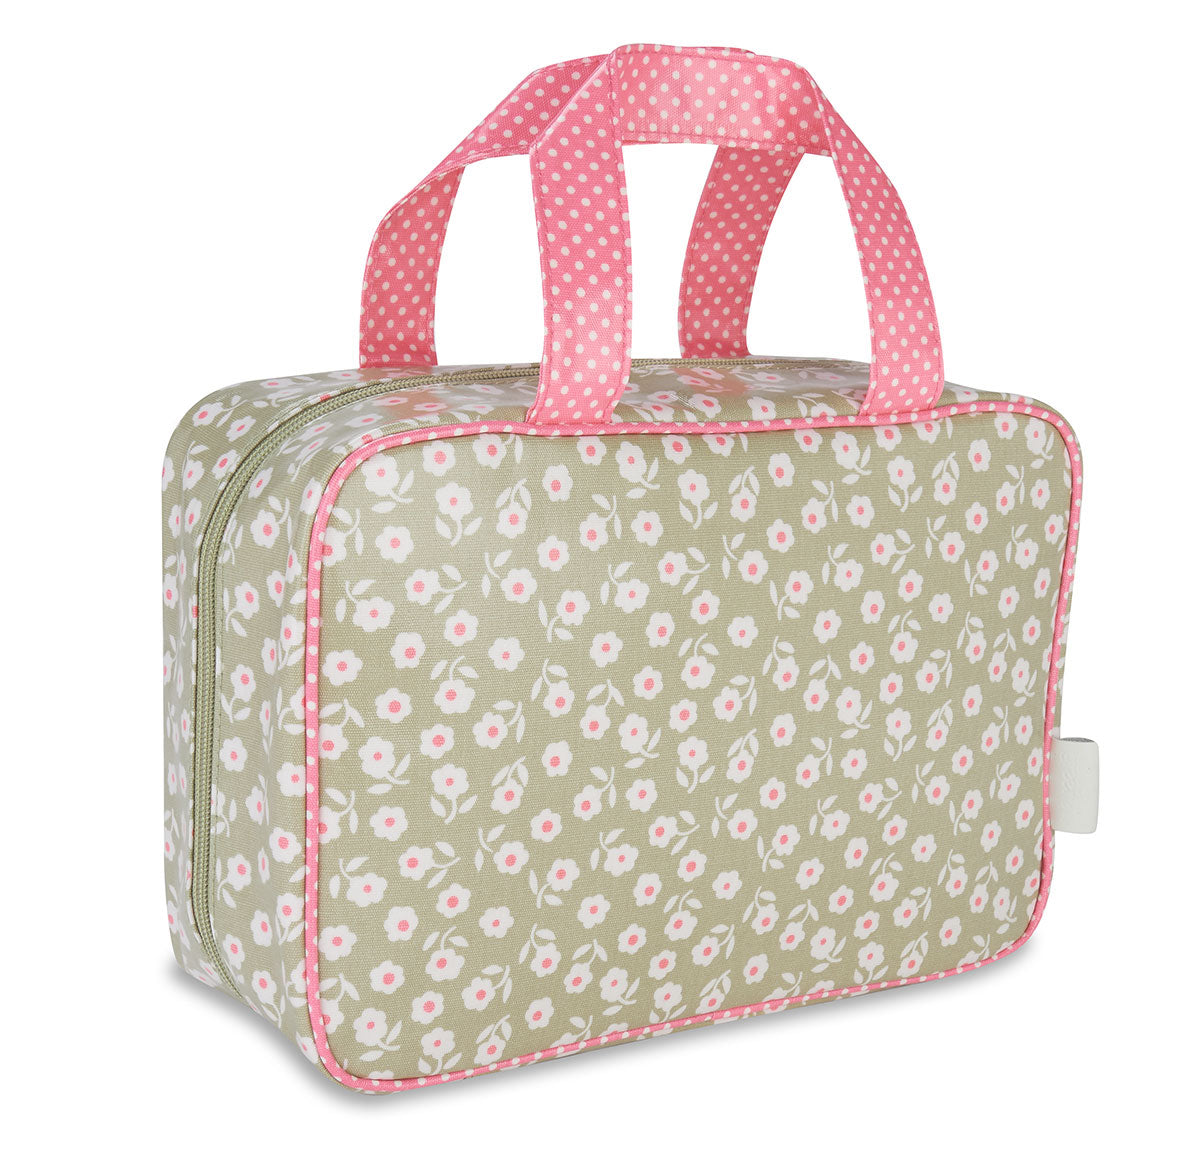 Buy 'Daisy' Hanging Traveller Wash Bag in Sage | Victoria Green